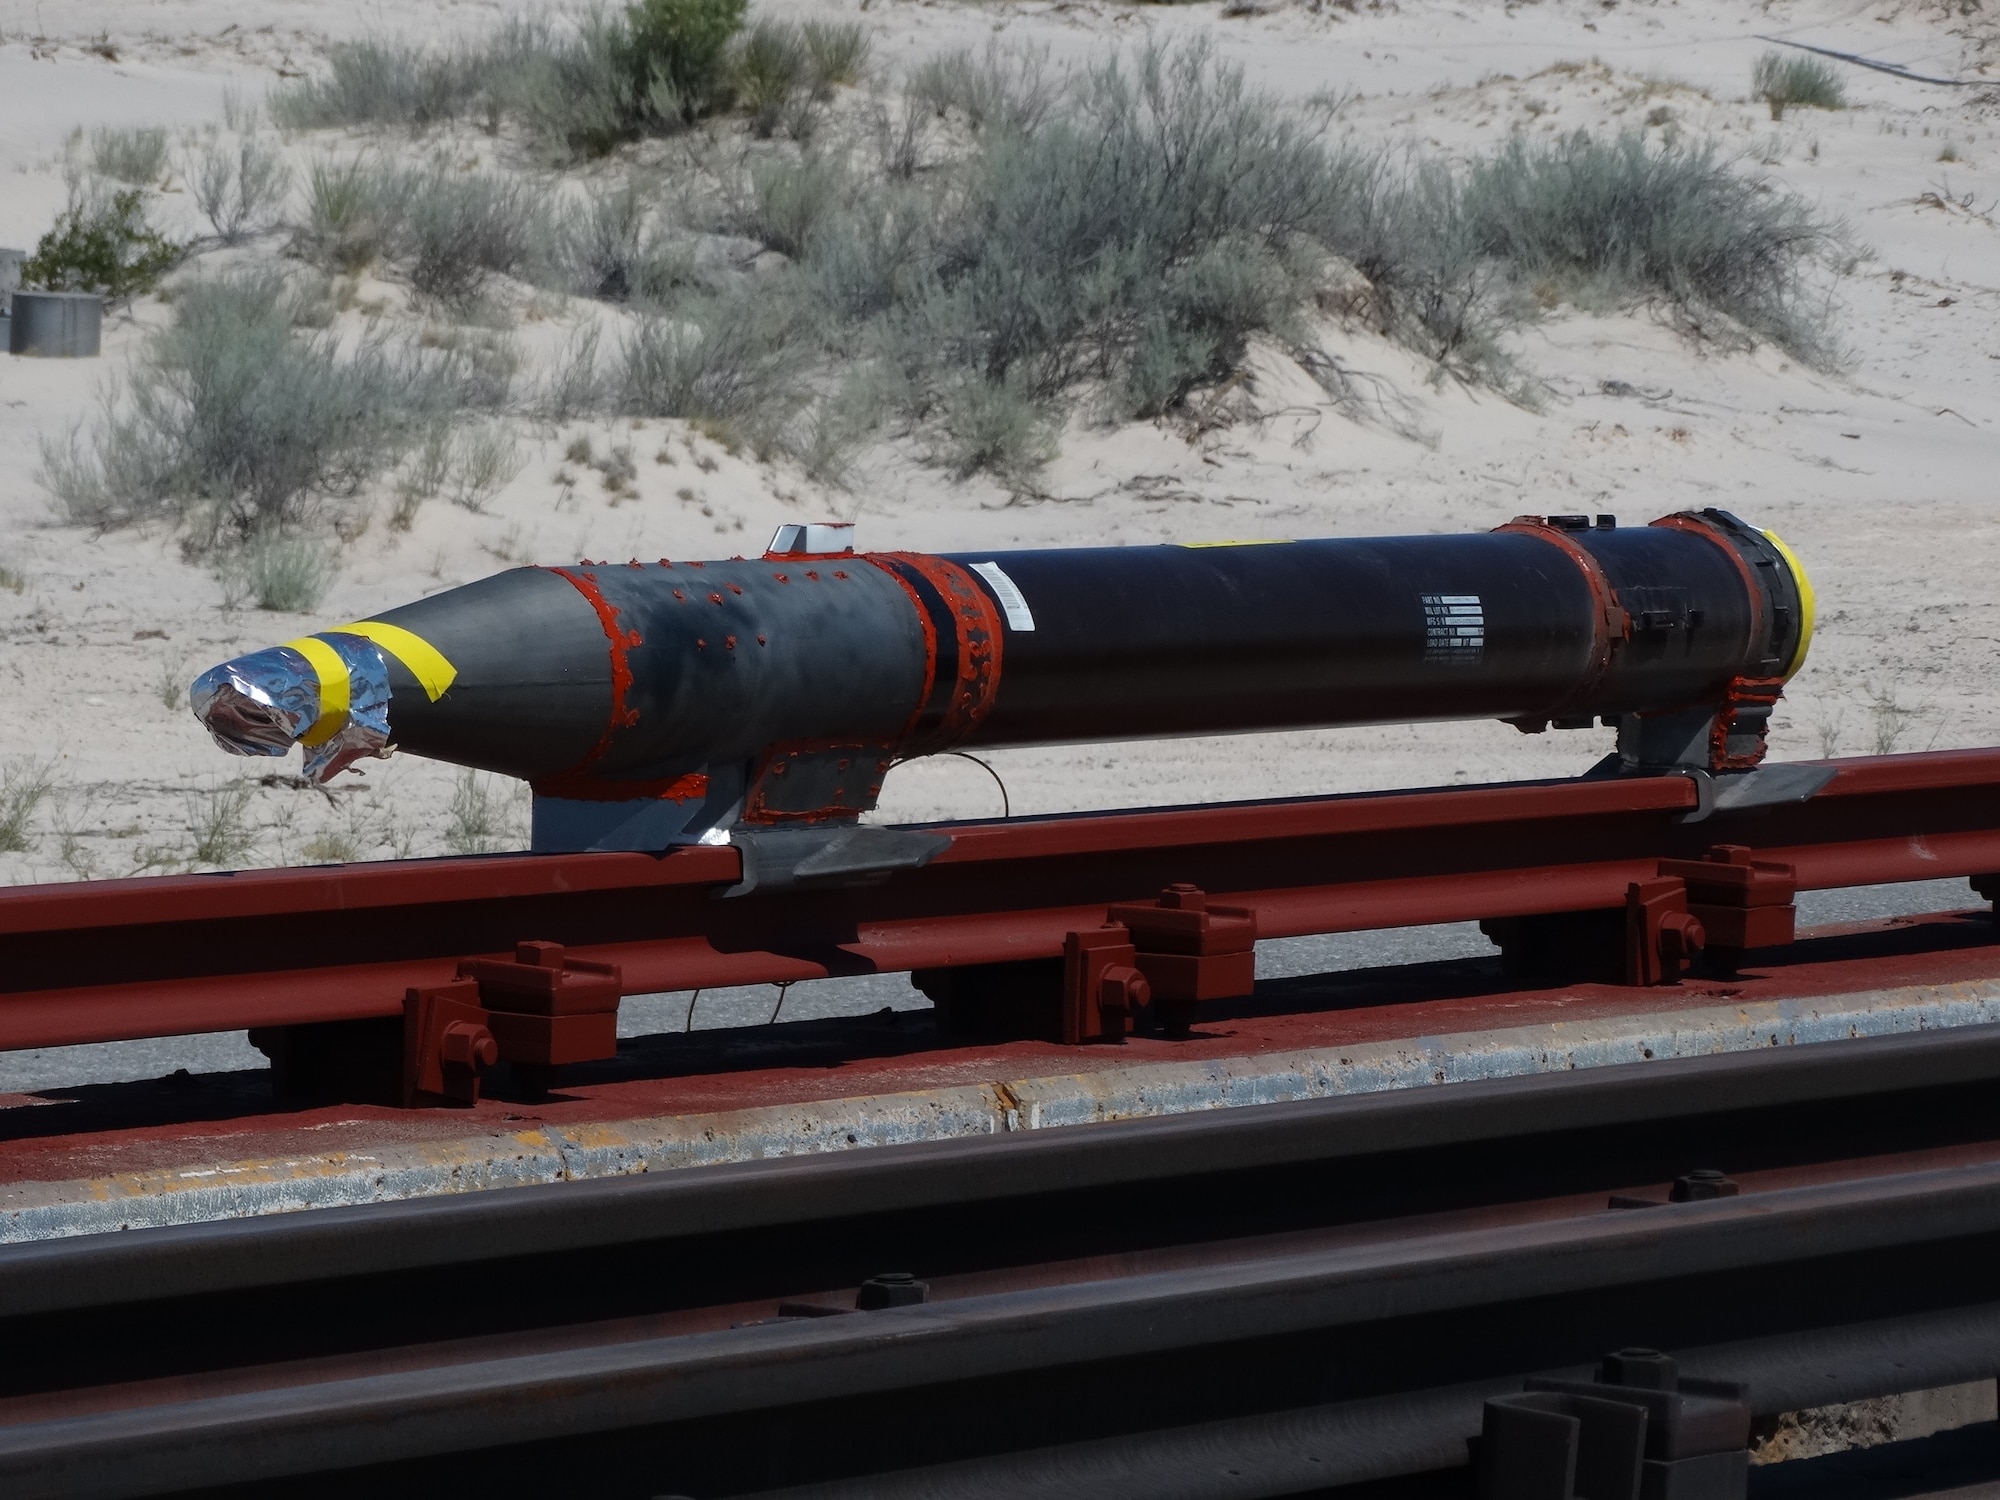 A rocket sled is shown just before launch on the Holloman High Speed Test Track at Holloman Air Force Base, New Mexico. The 9-inch monorail sled was launched as part of the Hypersonic Readiness program, which is a series of tests being conducted by the 846th Test Squadron at Holloman to prepare for future rocket sled testing to support programs and projects including the Hypersonic Test and Evaluation Investment Portfolio and Air-Launched Rapid Response Weapon, as well as hypersonic sled tests for other customers. (U.S. Air Force photo)